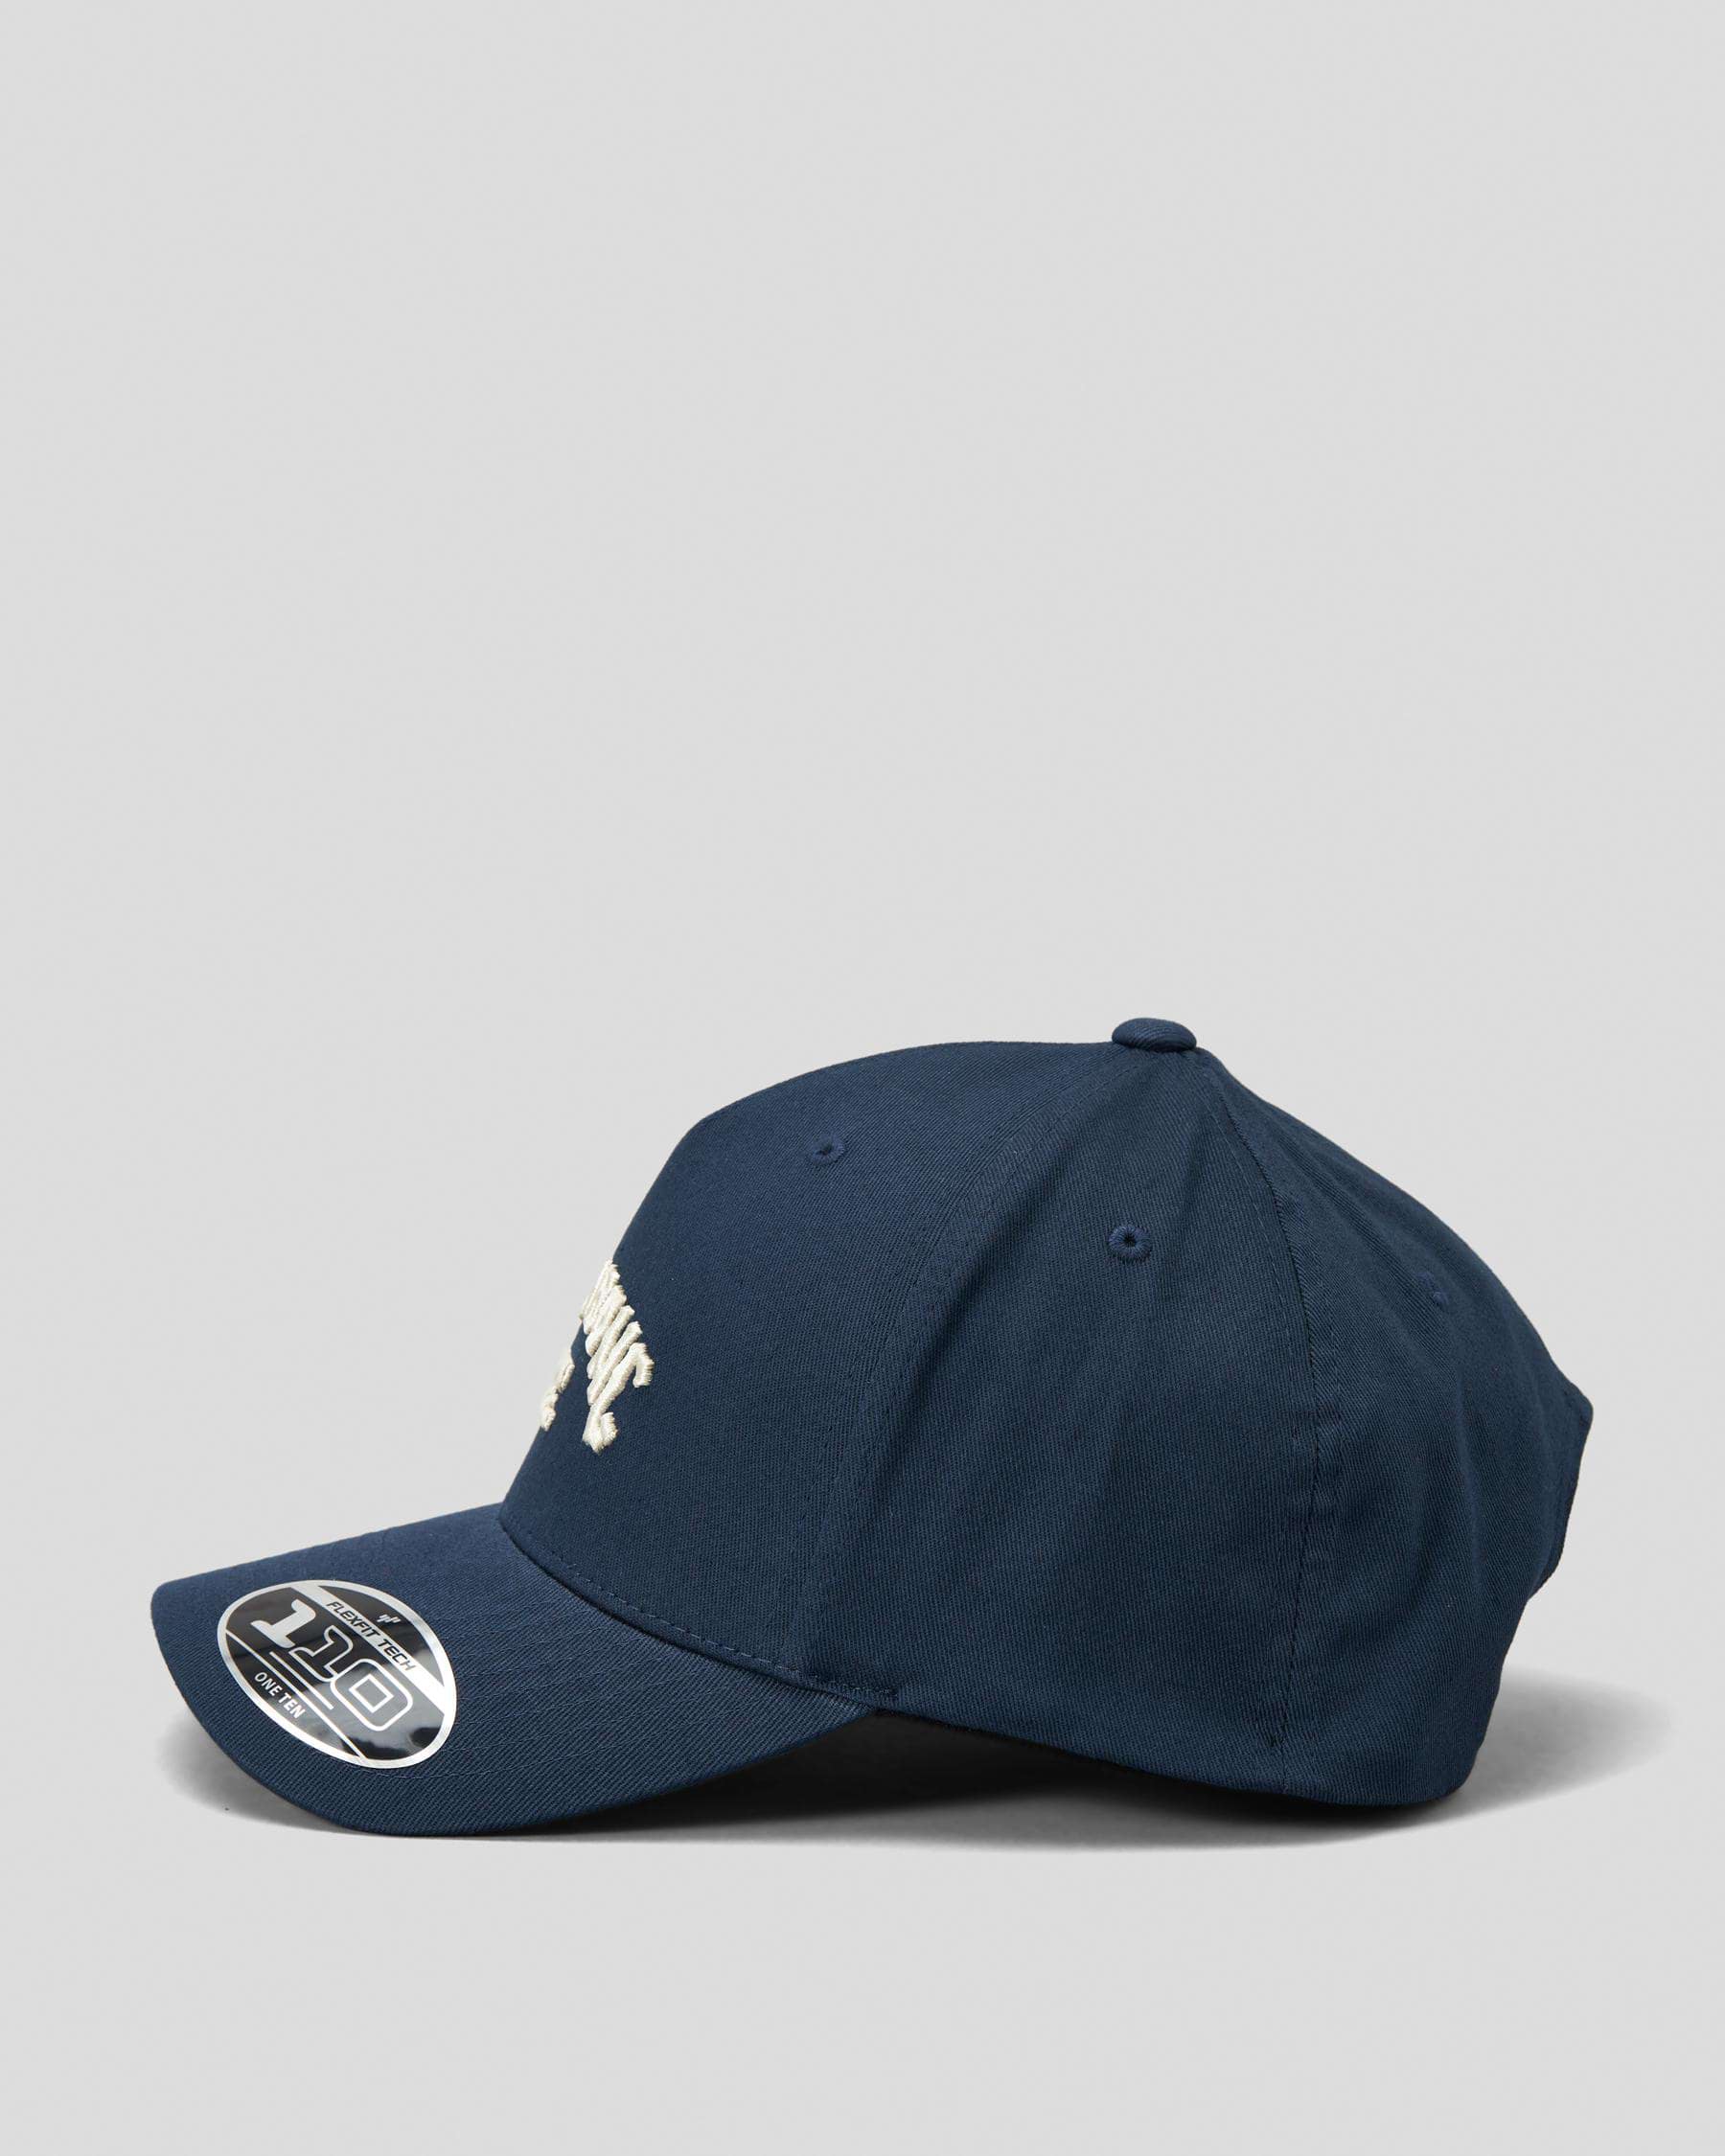 Navy - FREE* Arch States 110 Cap Shipping United Beach - Returns In City & Flexfit Snapback Easy Billabong